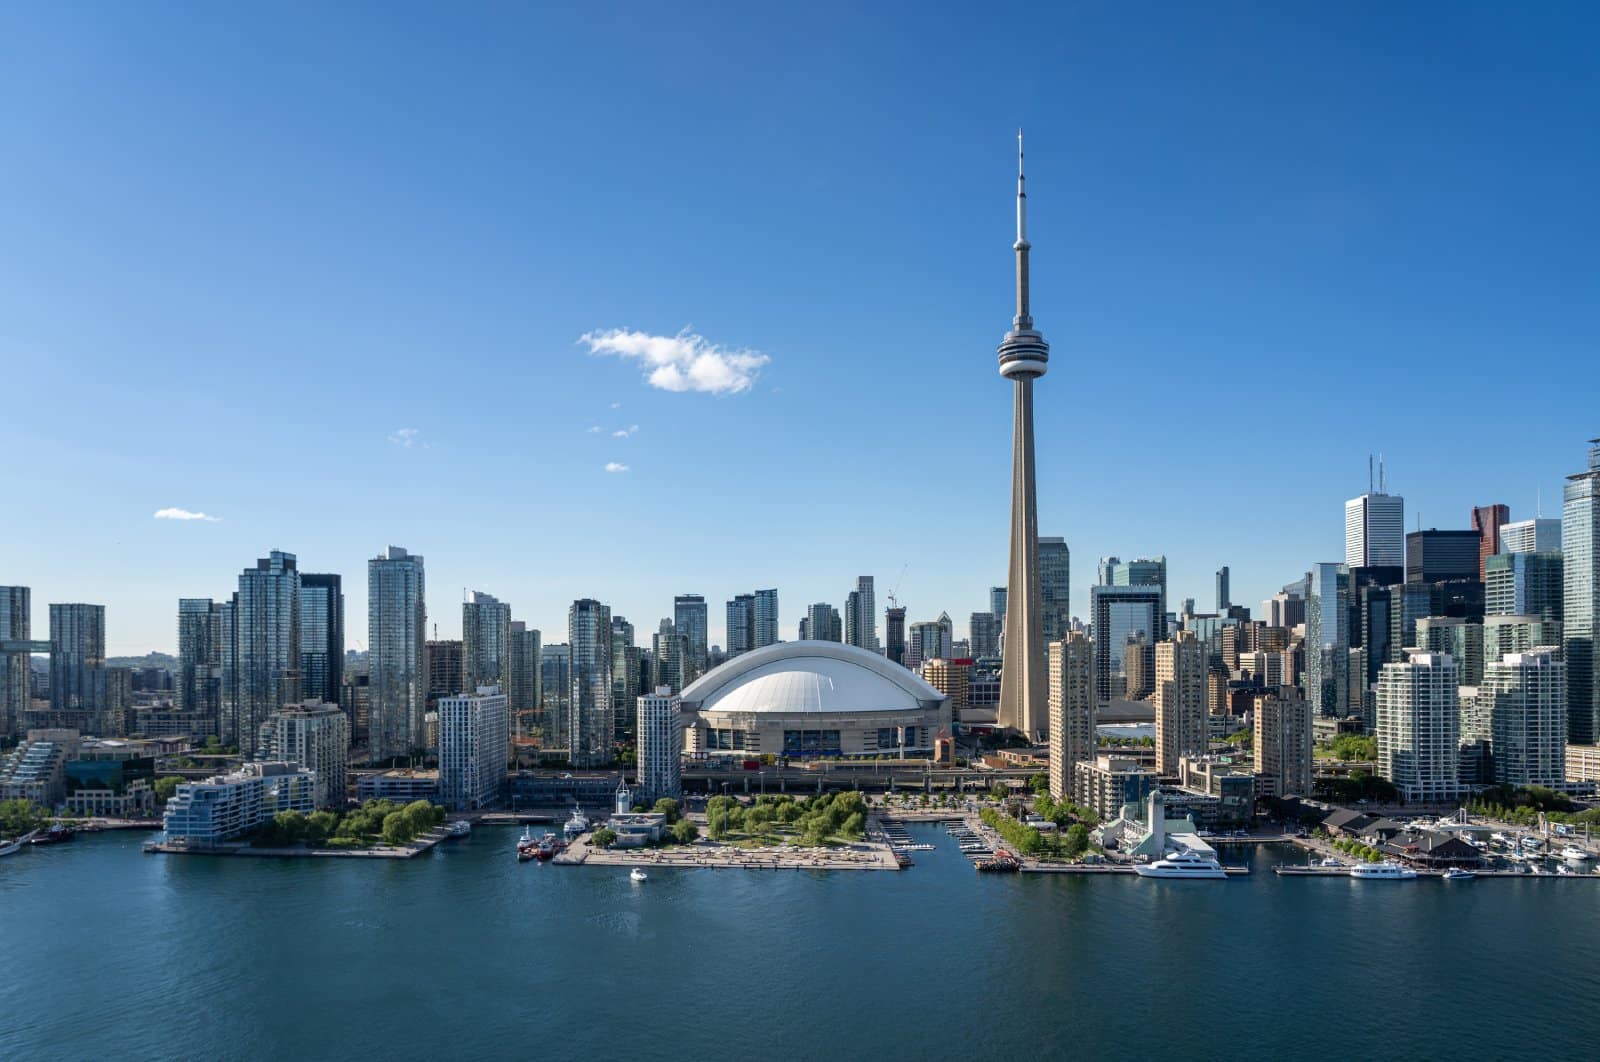 Image Credit: Shutterstock / Artem Zavarzin <p><span>Toronto’s diverse cultural makeup is mirrored in its food offerings, making it an exciting destination for vegan and vegetarian travelers. The city boasts an extensive selection of plant-based restaurants covering a wide range of cuisines and dining experiences. Toronto is also known for its vegan bakeries and dairy-free ice cream shops, ensuring that plant-based eaters don’t miss out on sweet treats.</span></p> <p><b>Insider’s Tip: </b><span>Explore the Kensington Market area for eclectic vegan-friendly cafes and grocery stores specializing in plant-based products.</span></p>